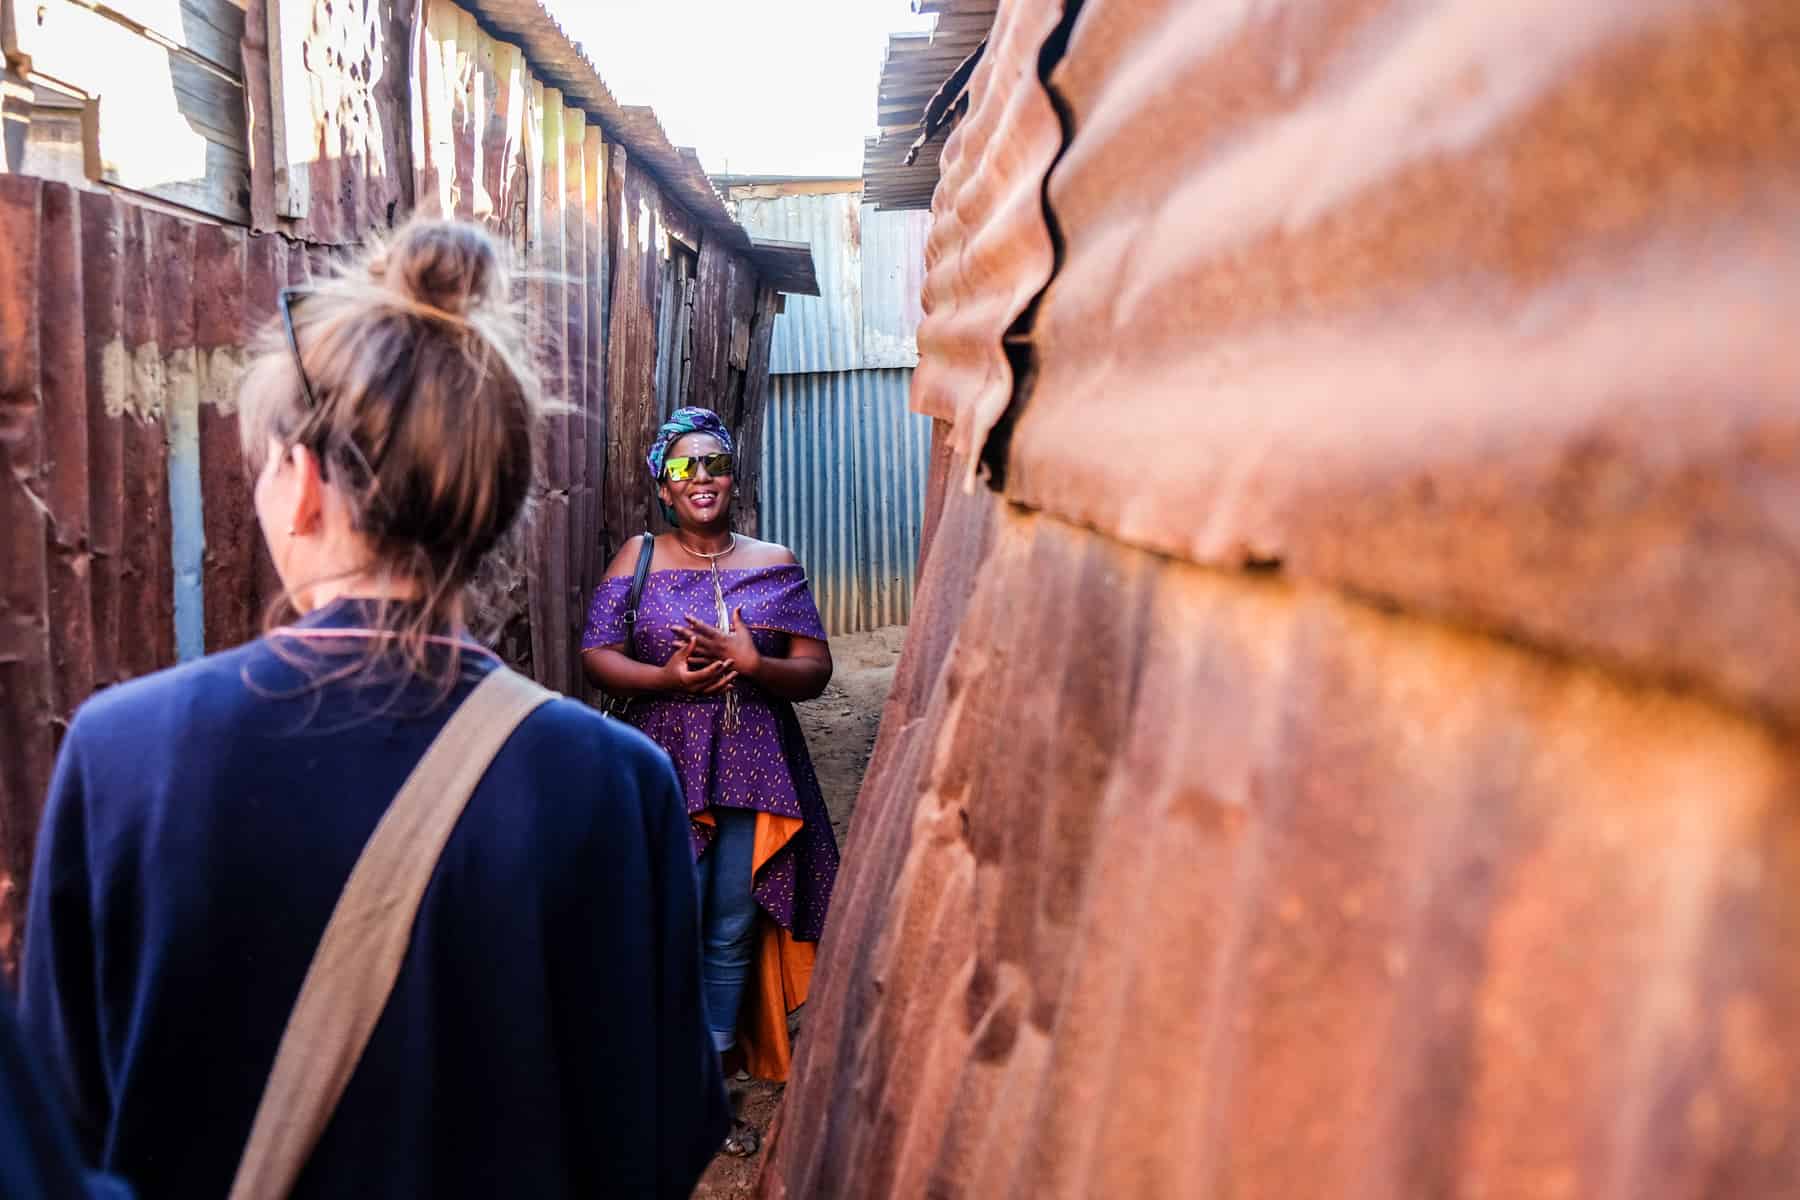 A woman in a purple dress and blue head covering looks towards the camera while standing in a narrow gap between rusting iron house walls in a township in South Africa. A woman in a blue cardigan walks towards her while on a tour.